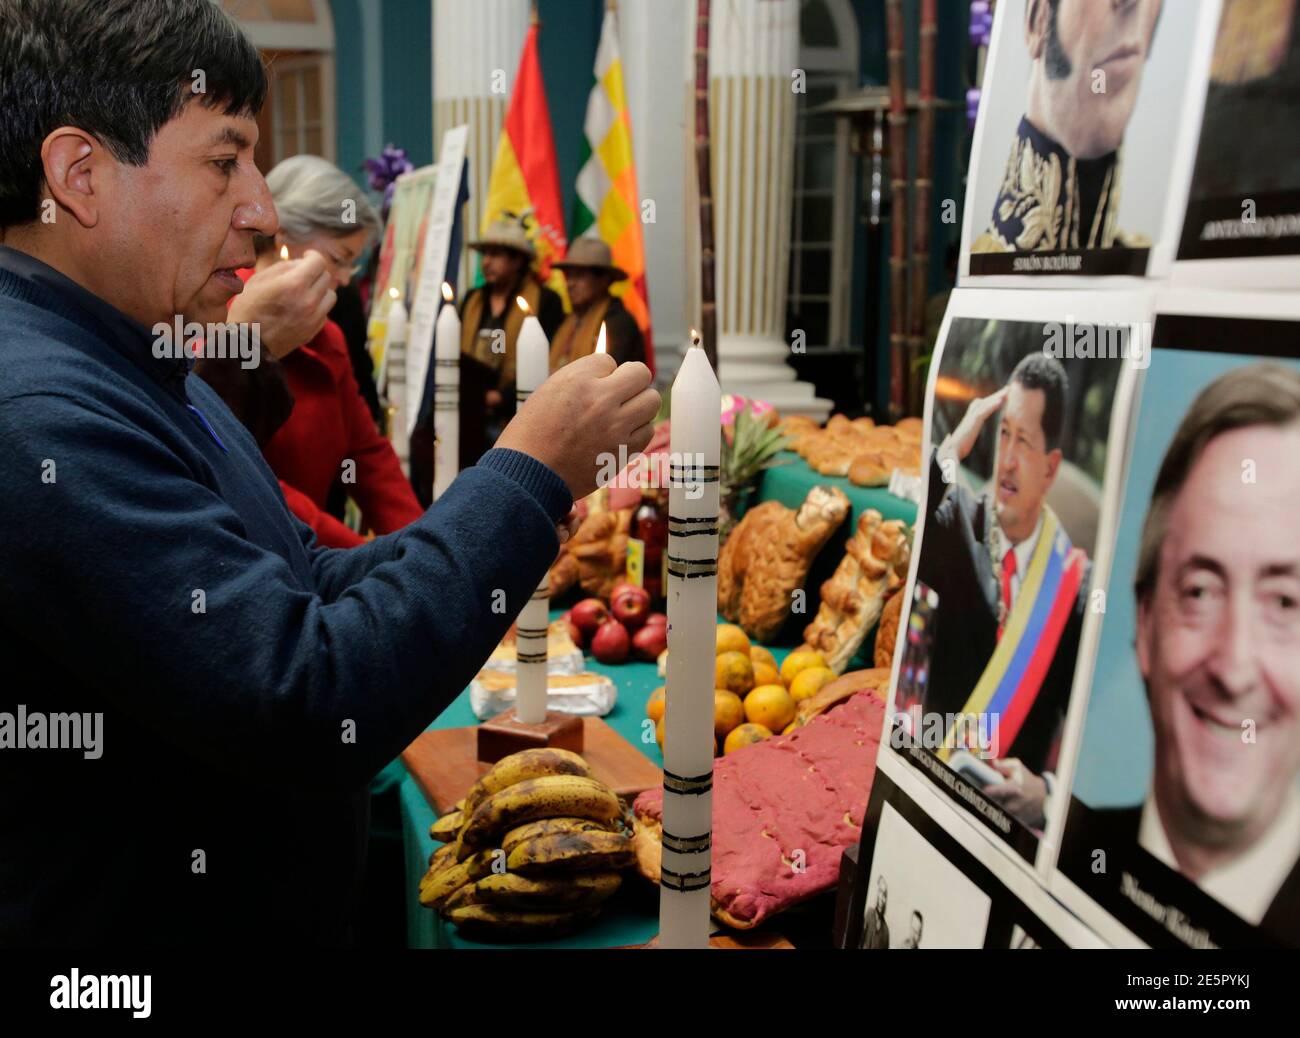 Bolivian Foreign Minister David Choquehuanca lights a candle during an All Saints' Day celebration in front of images depicting Argentine former president Nestor Kirchner and Venezuela's Hugo Chavez in La Paz, November 1, 2013. Traditionally, indigenous Bolivians celebrate All Saints Day by paying homage to their dead ones with a feast of home-baked, doll-shaped breads, fresh fruit and coca leaves and flowers. The syncretism practiced by the Aymaras, a blend of Catholicism and indigenous beliefs, calls for the offerings to be neatly placed on top of graves, and then to give them away to beggar Foto Stock